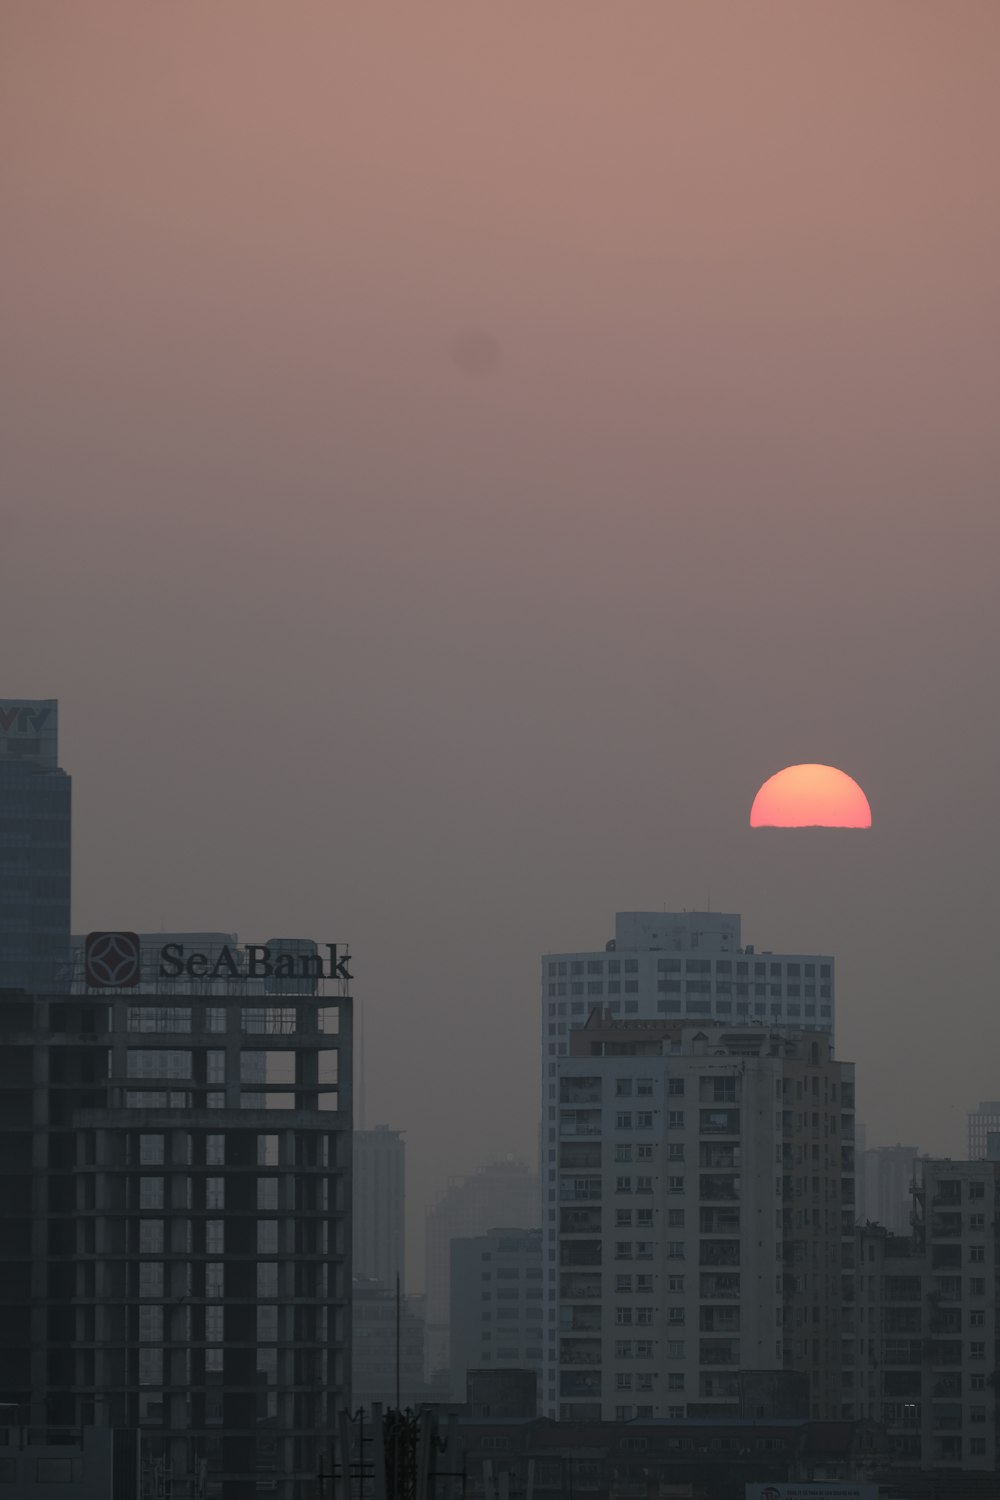 the sun is setting over a city with tall buildings